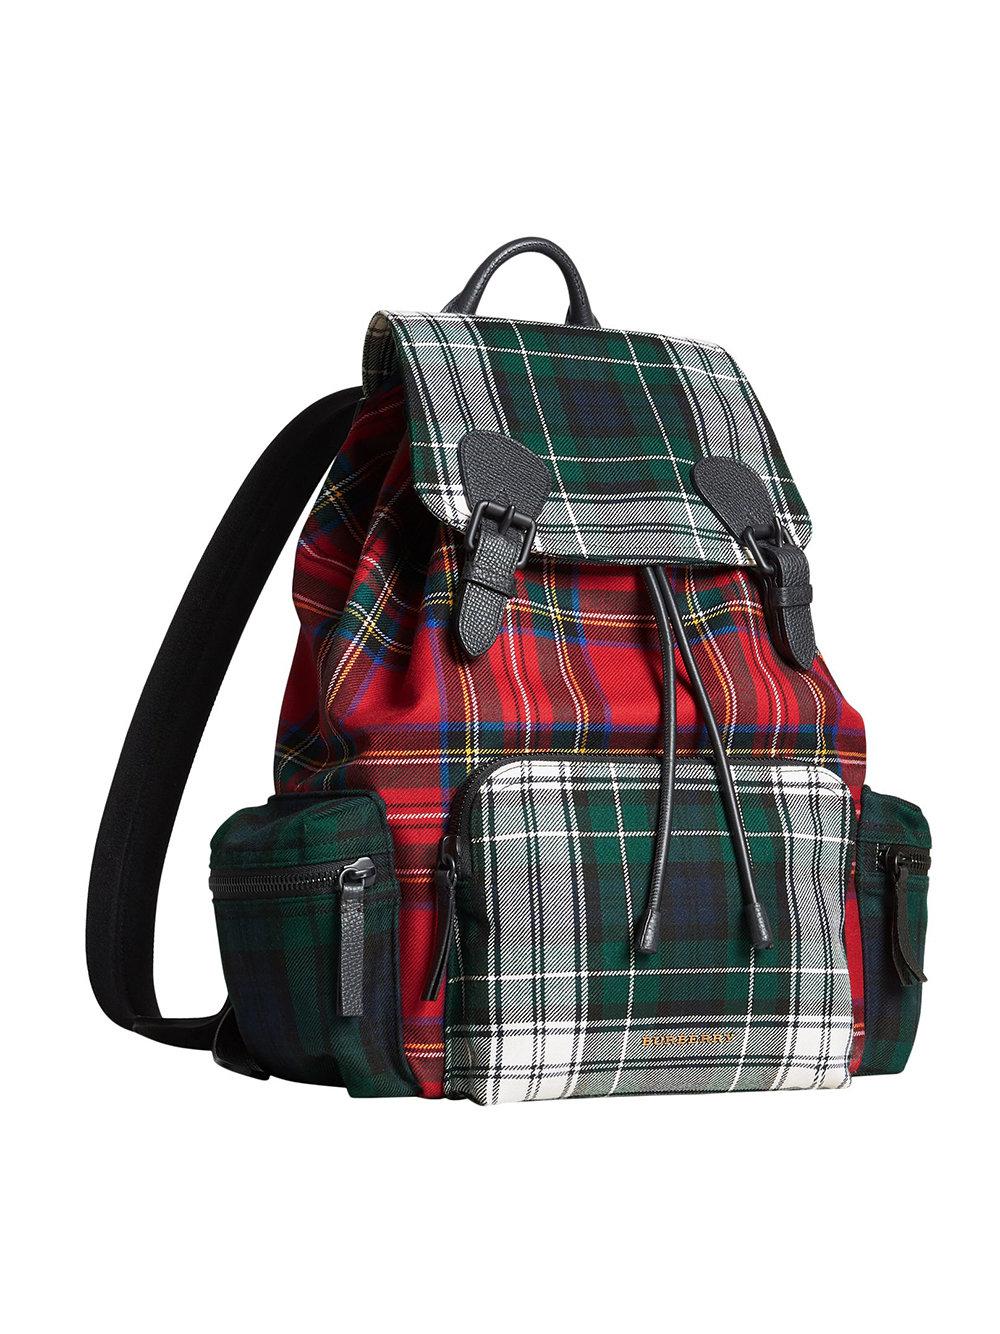 Burberry Leather Large Patchwork Tartan Rucksack in Red | Lyst Australia